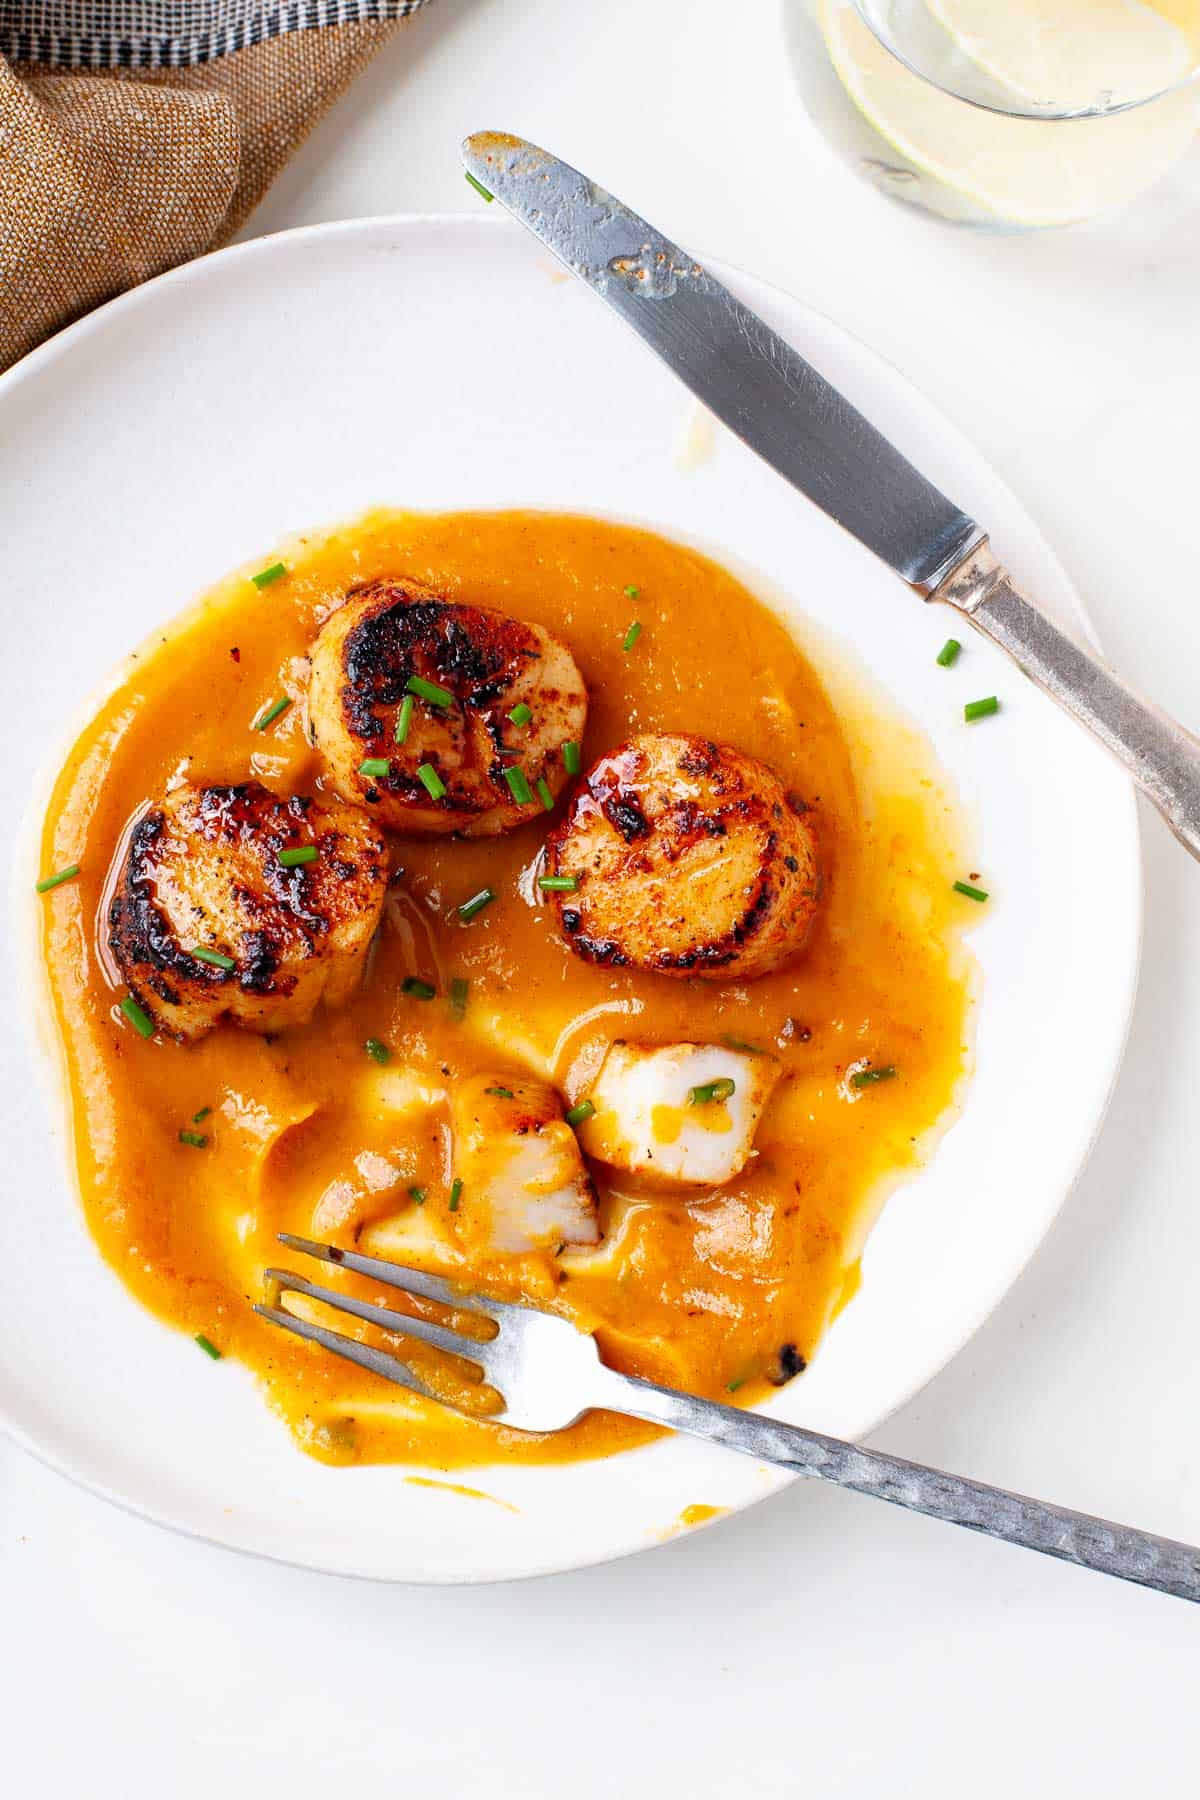 seared scallops over pumpkin puree on white plate with silver fork and knife. 